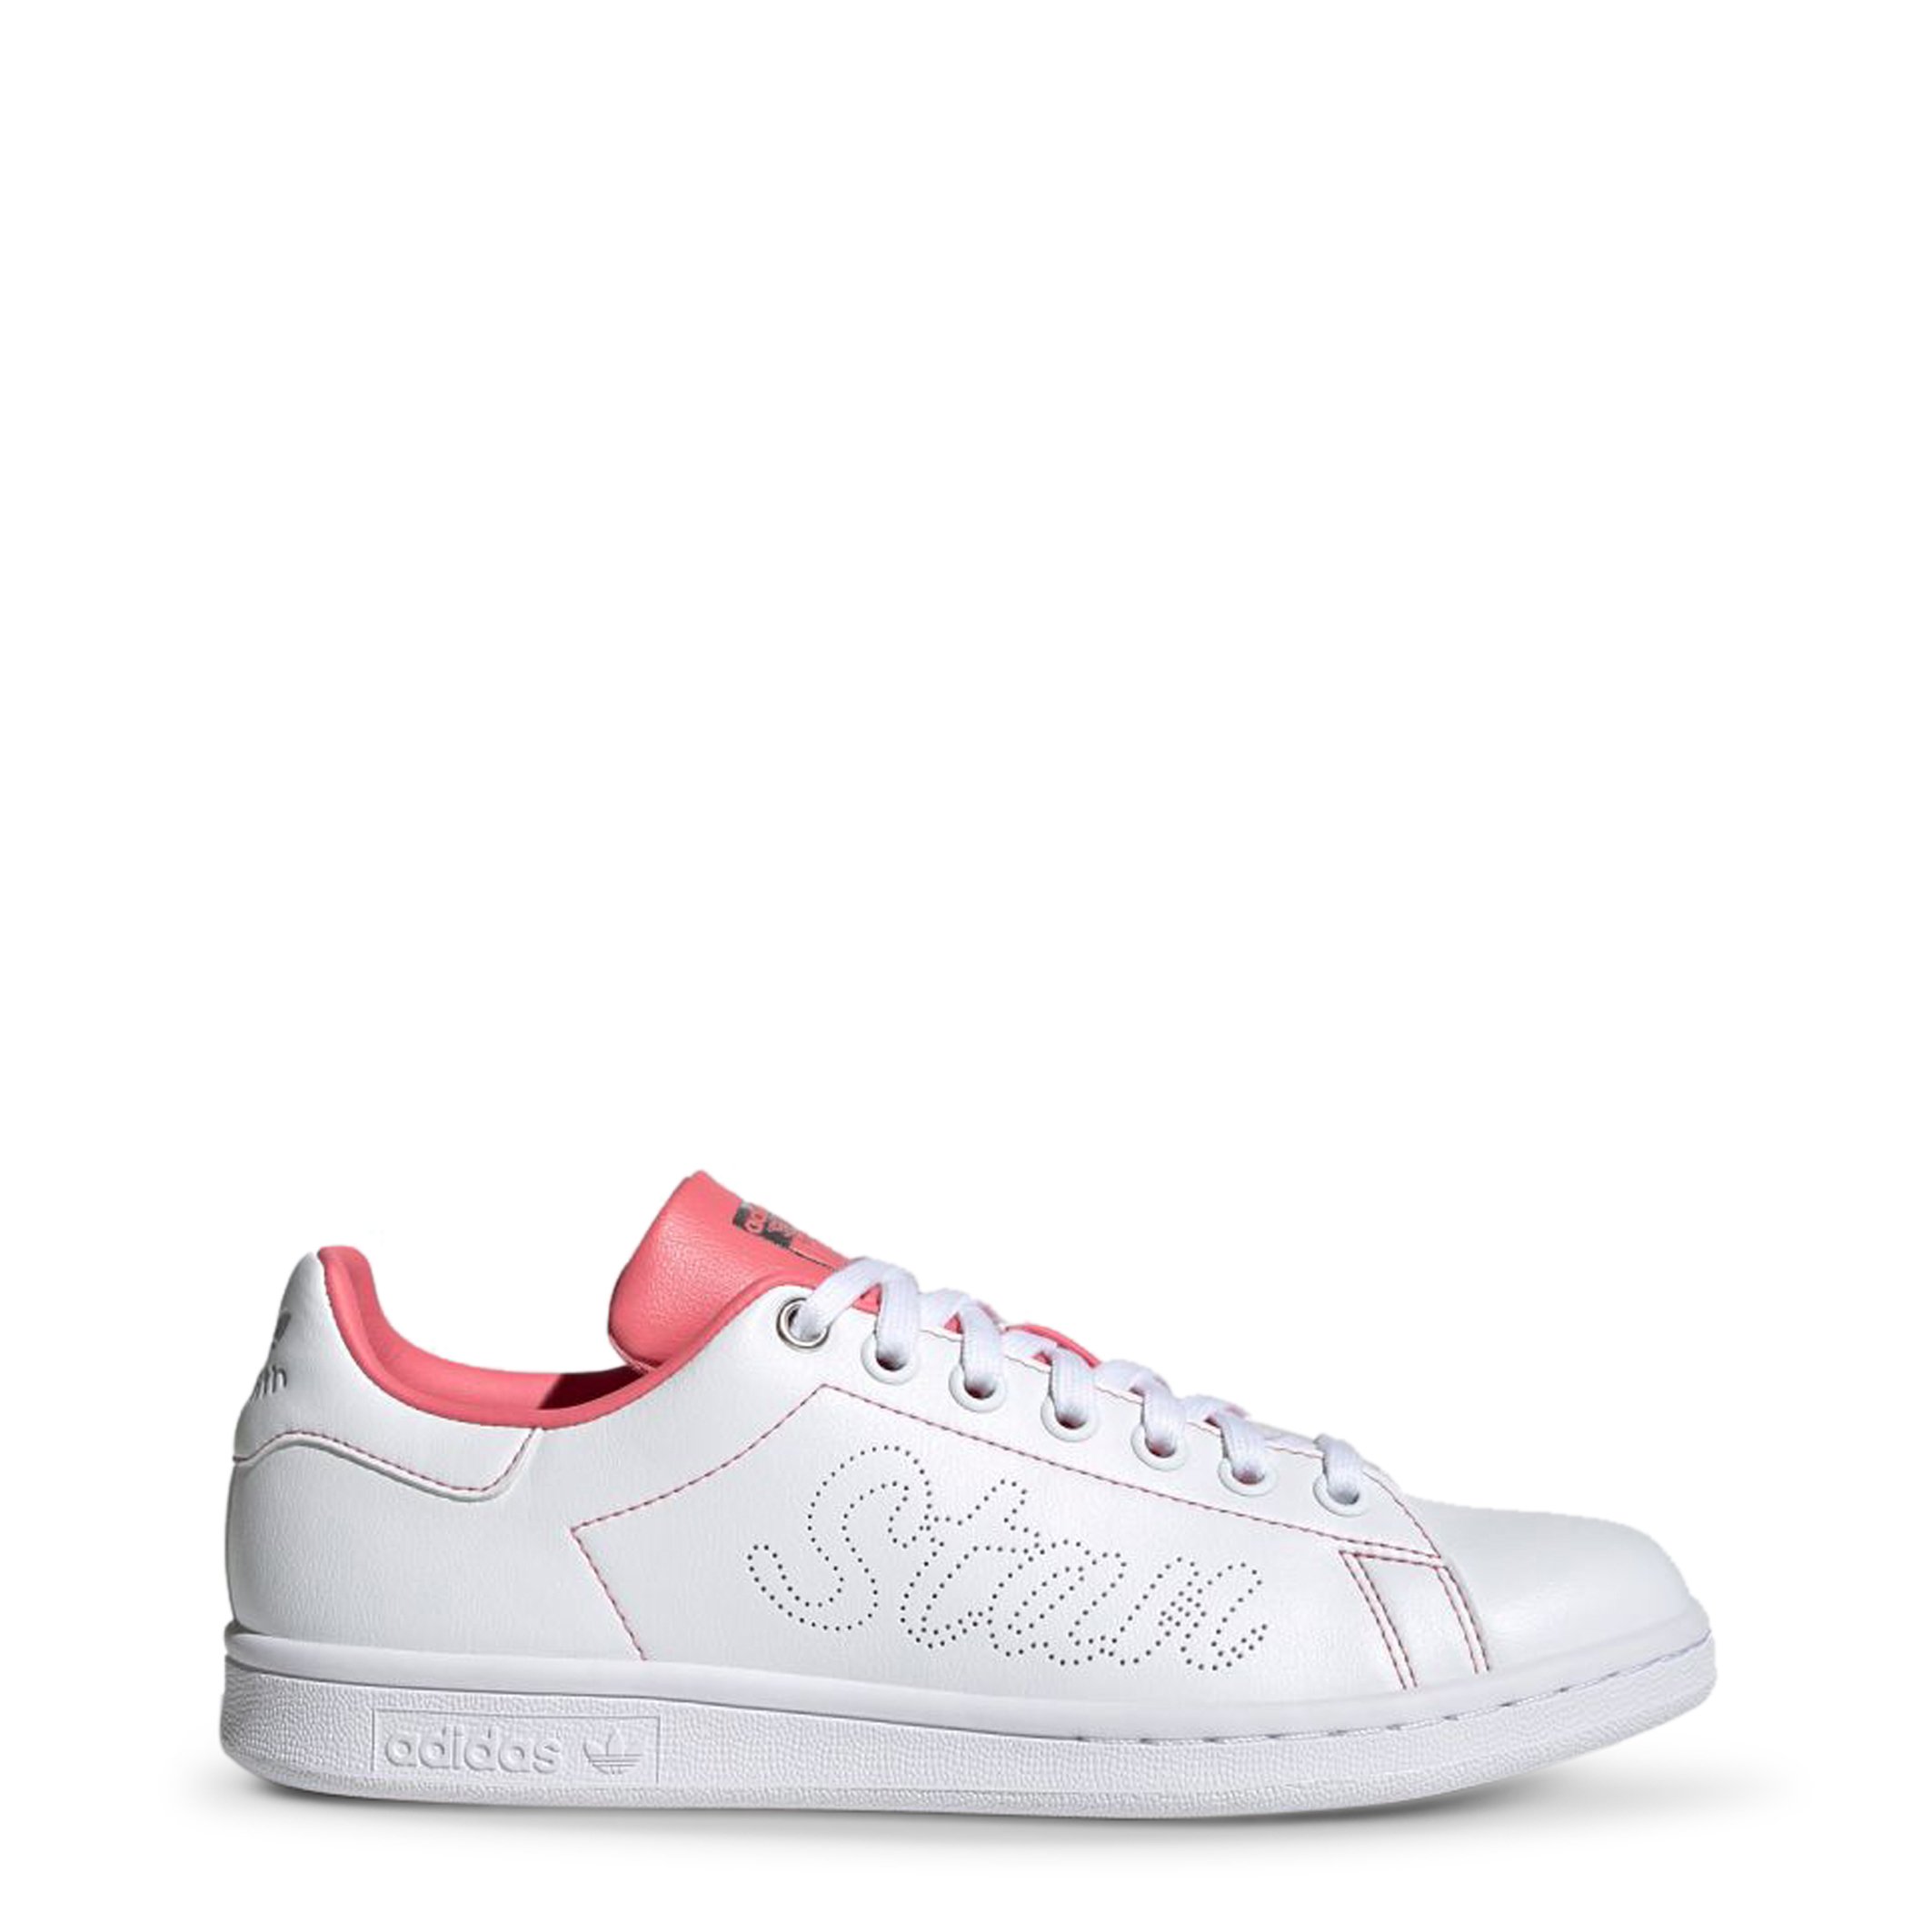 Adidas Unisex Stan Smith Trainers Various Colours - white-5 UK 3.5